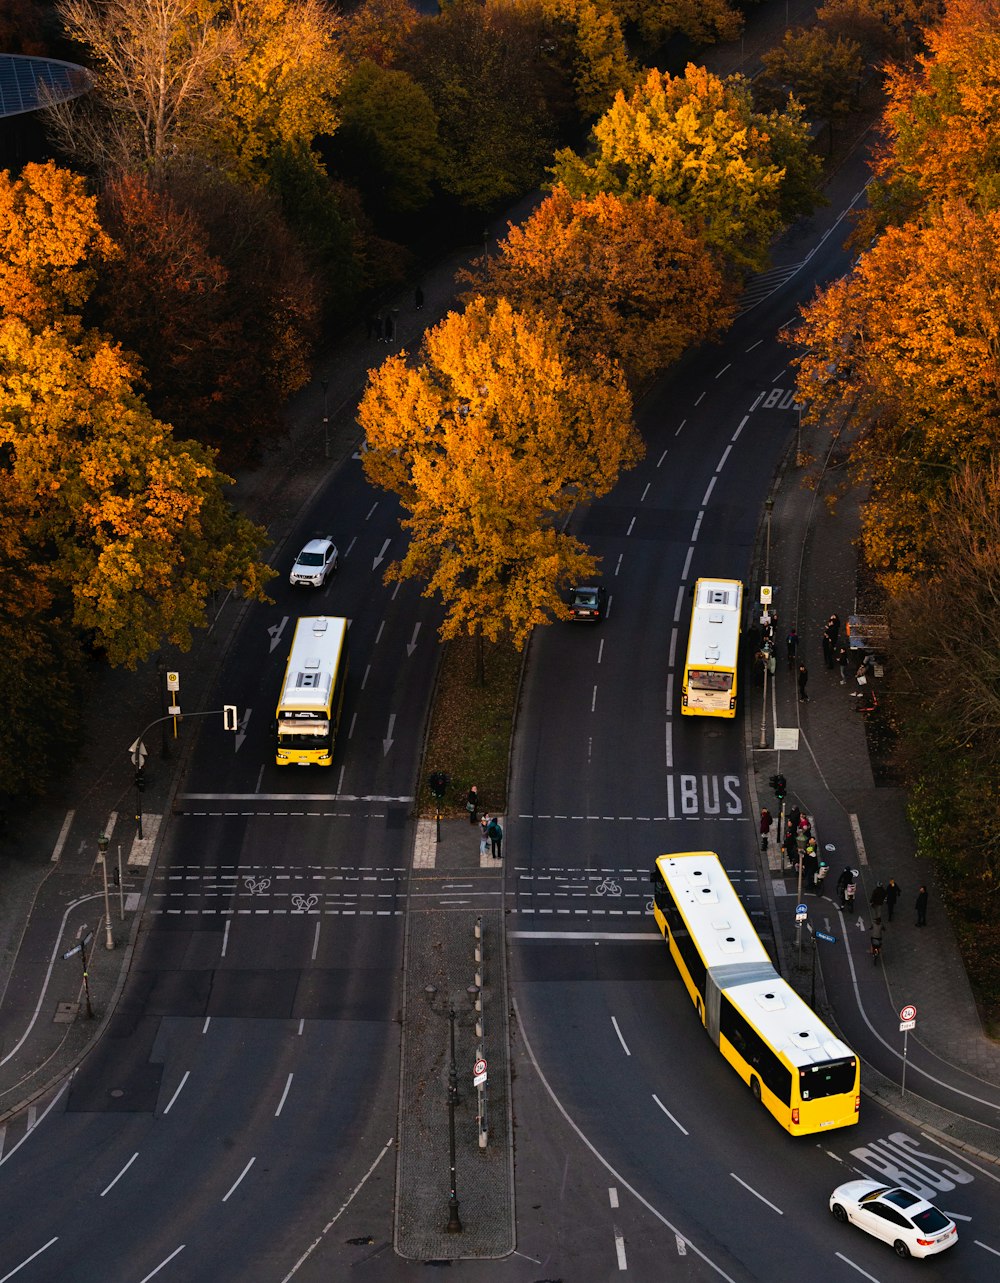 buses on road during daytime